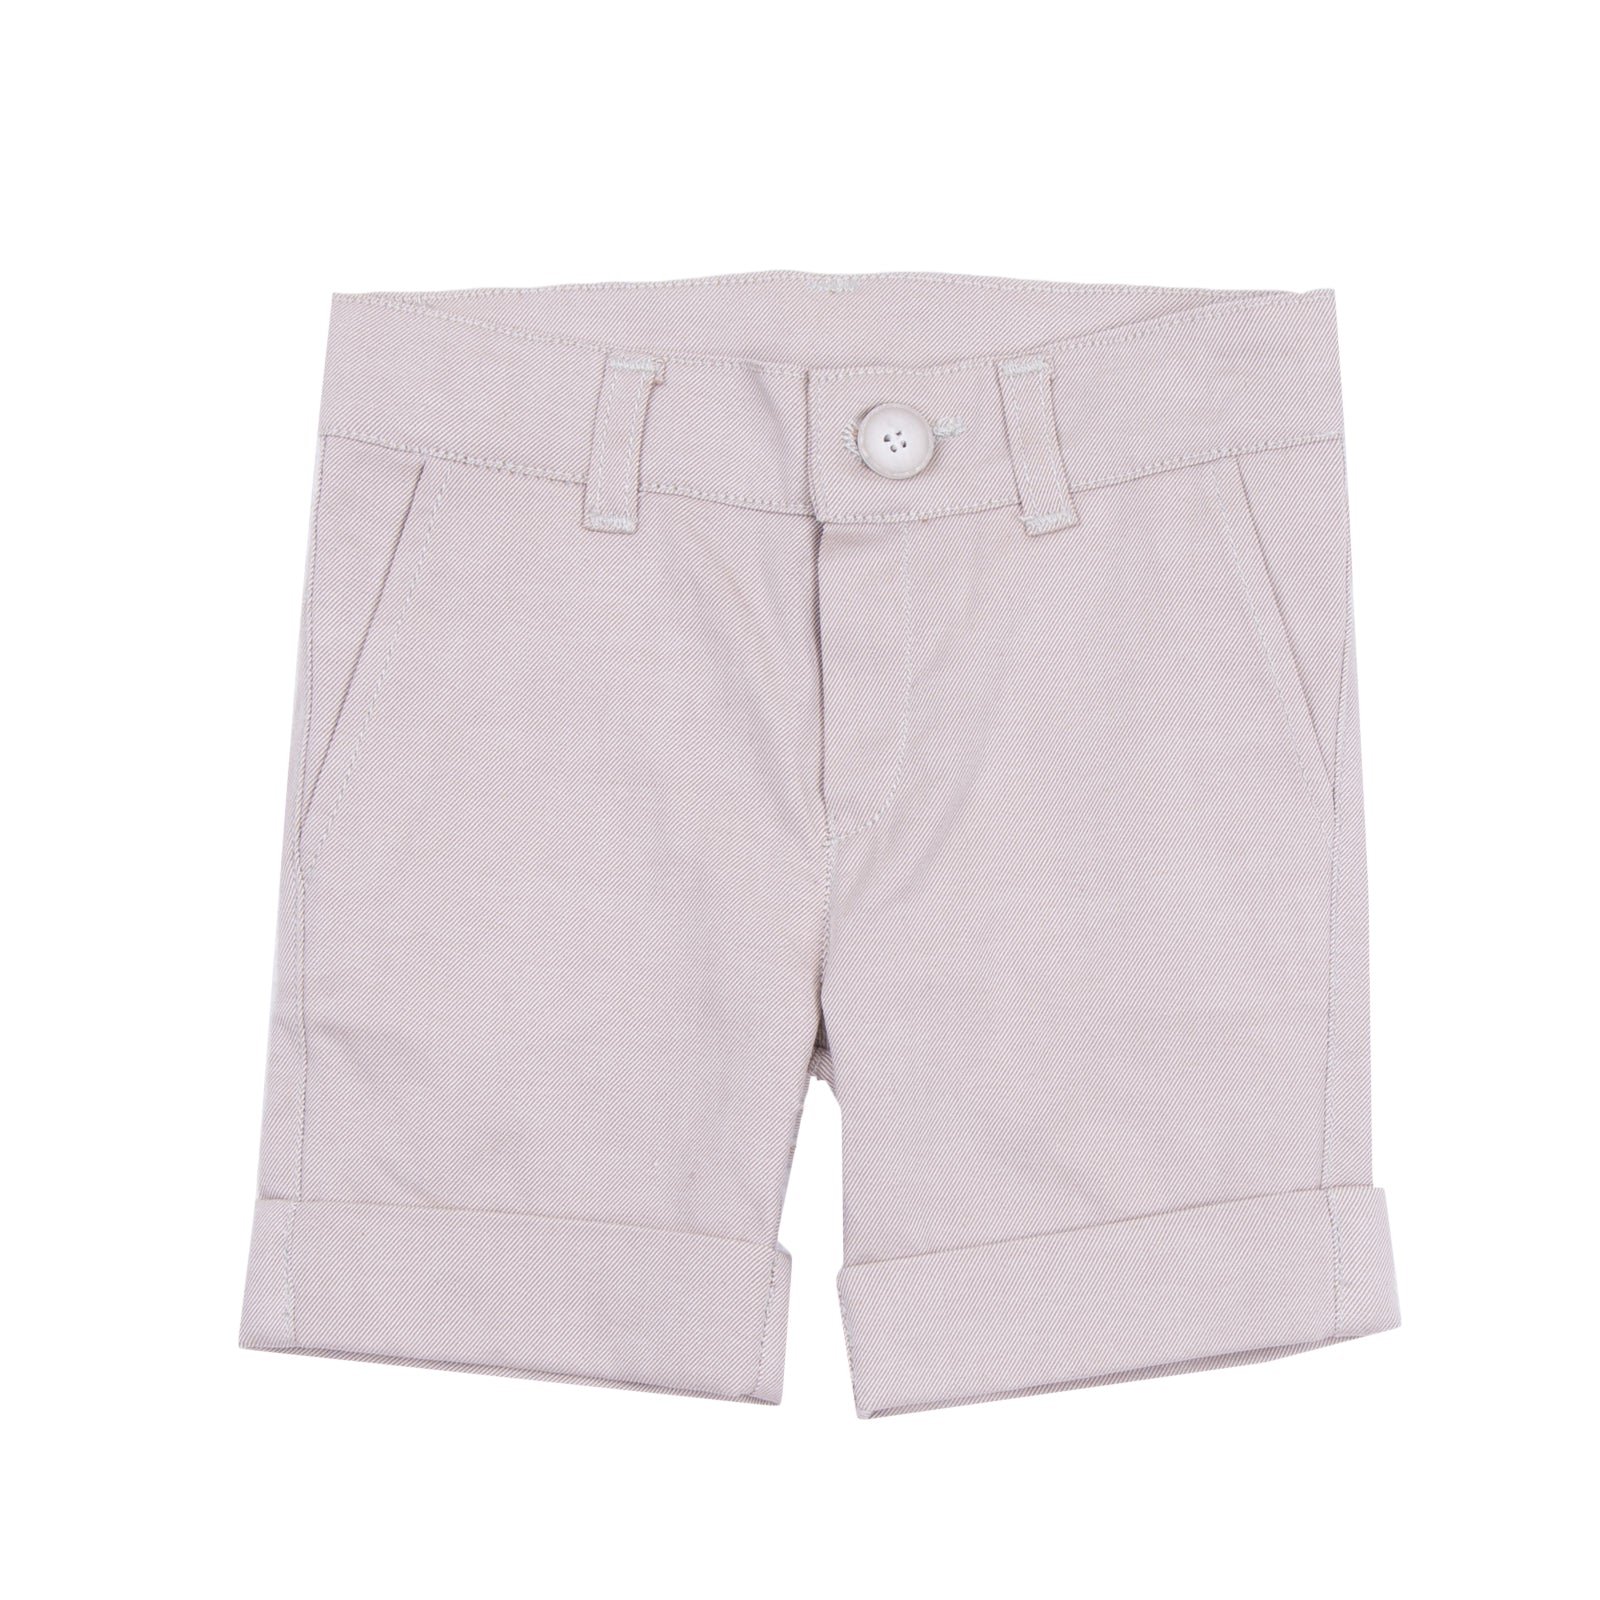 ALETTA Chino Shorts Size 6M / 68 CM Turn-Up Cuffs Adjustable Waist Made in Italy gallery main photo